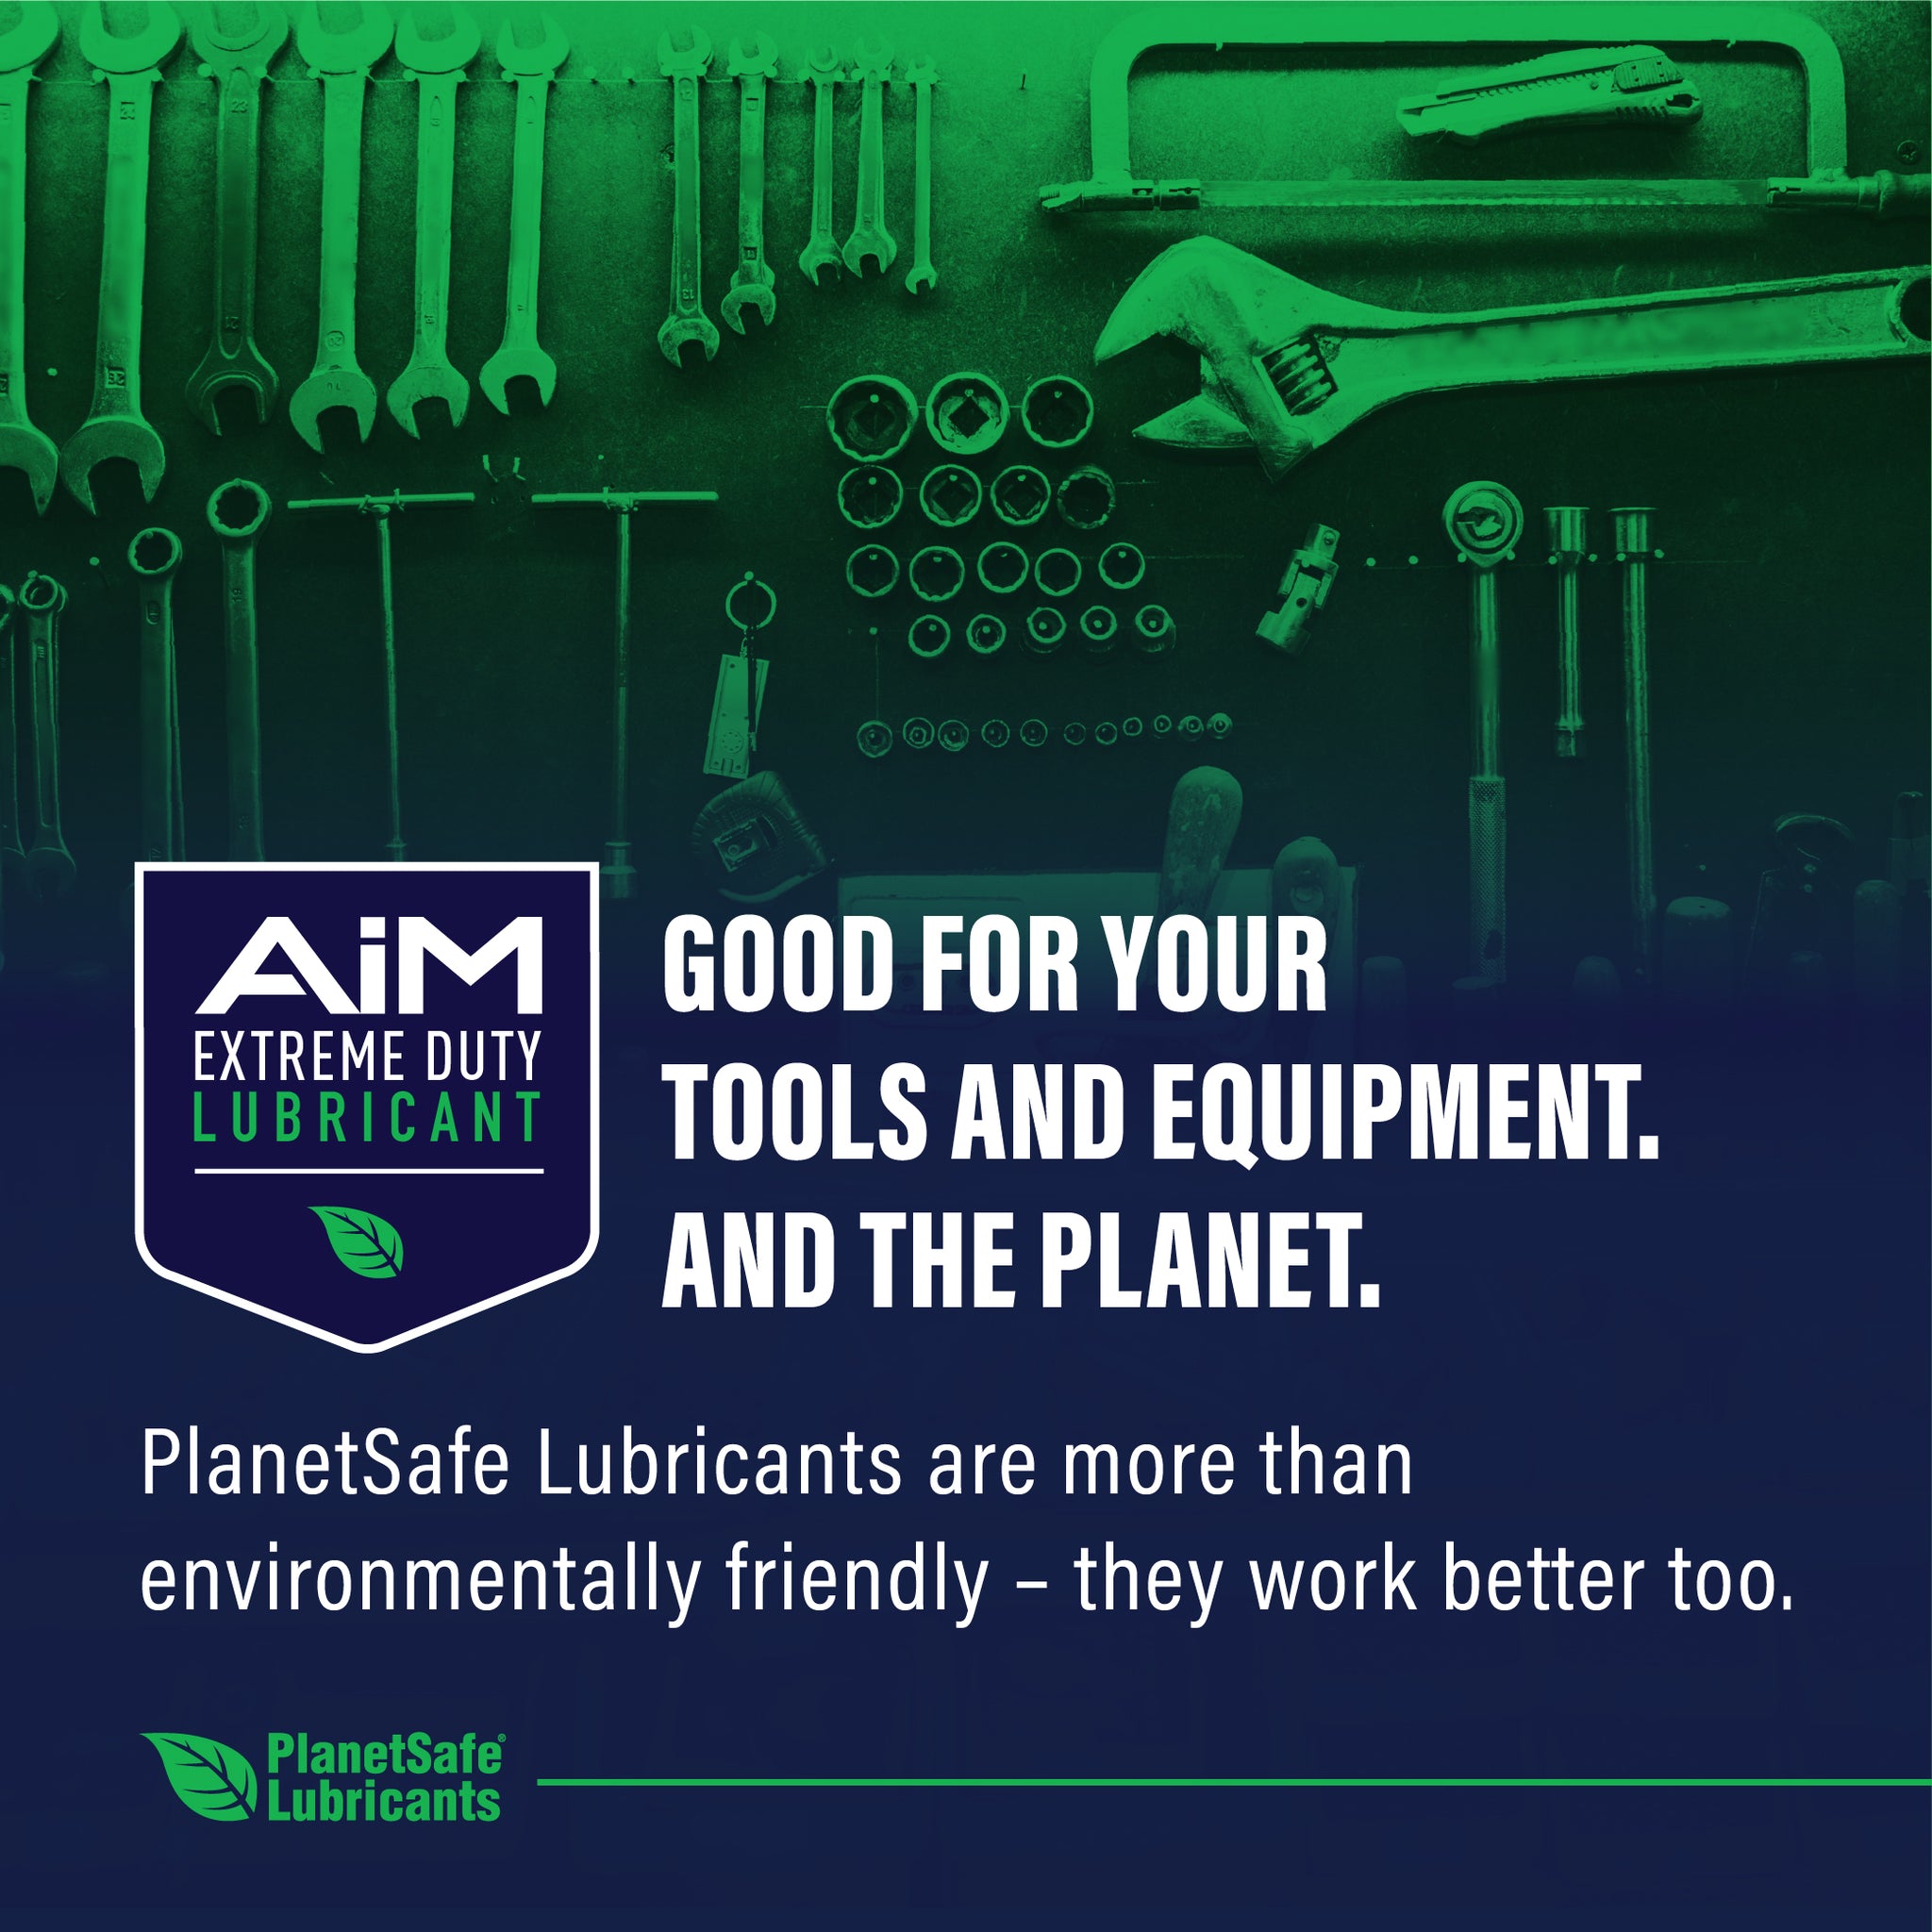 PlanetSafe AIM Bike and Chain Extreme Duty Lubricant - Worlds best bike chain lube oil fix rusty - what is the best safe bicycle chain lube?